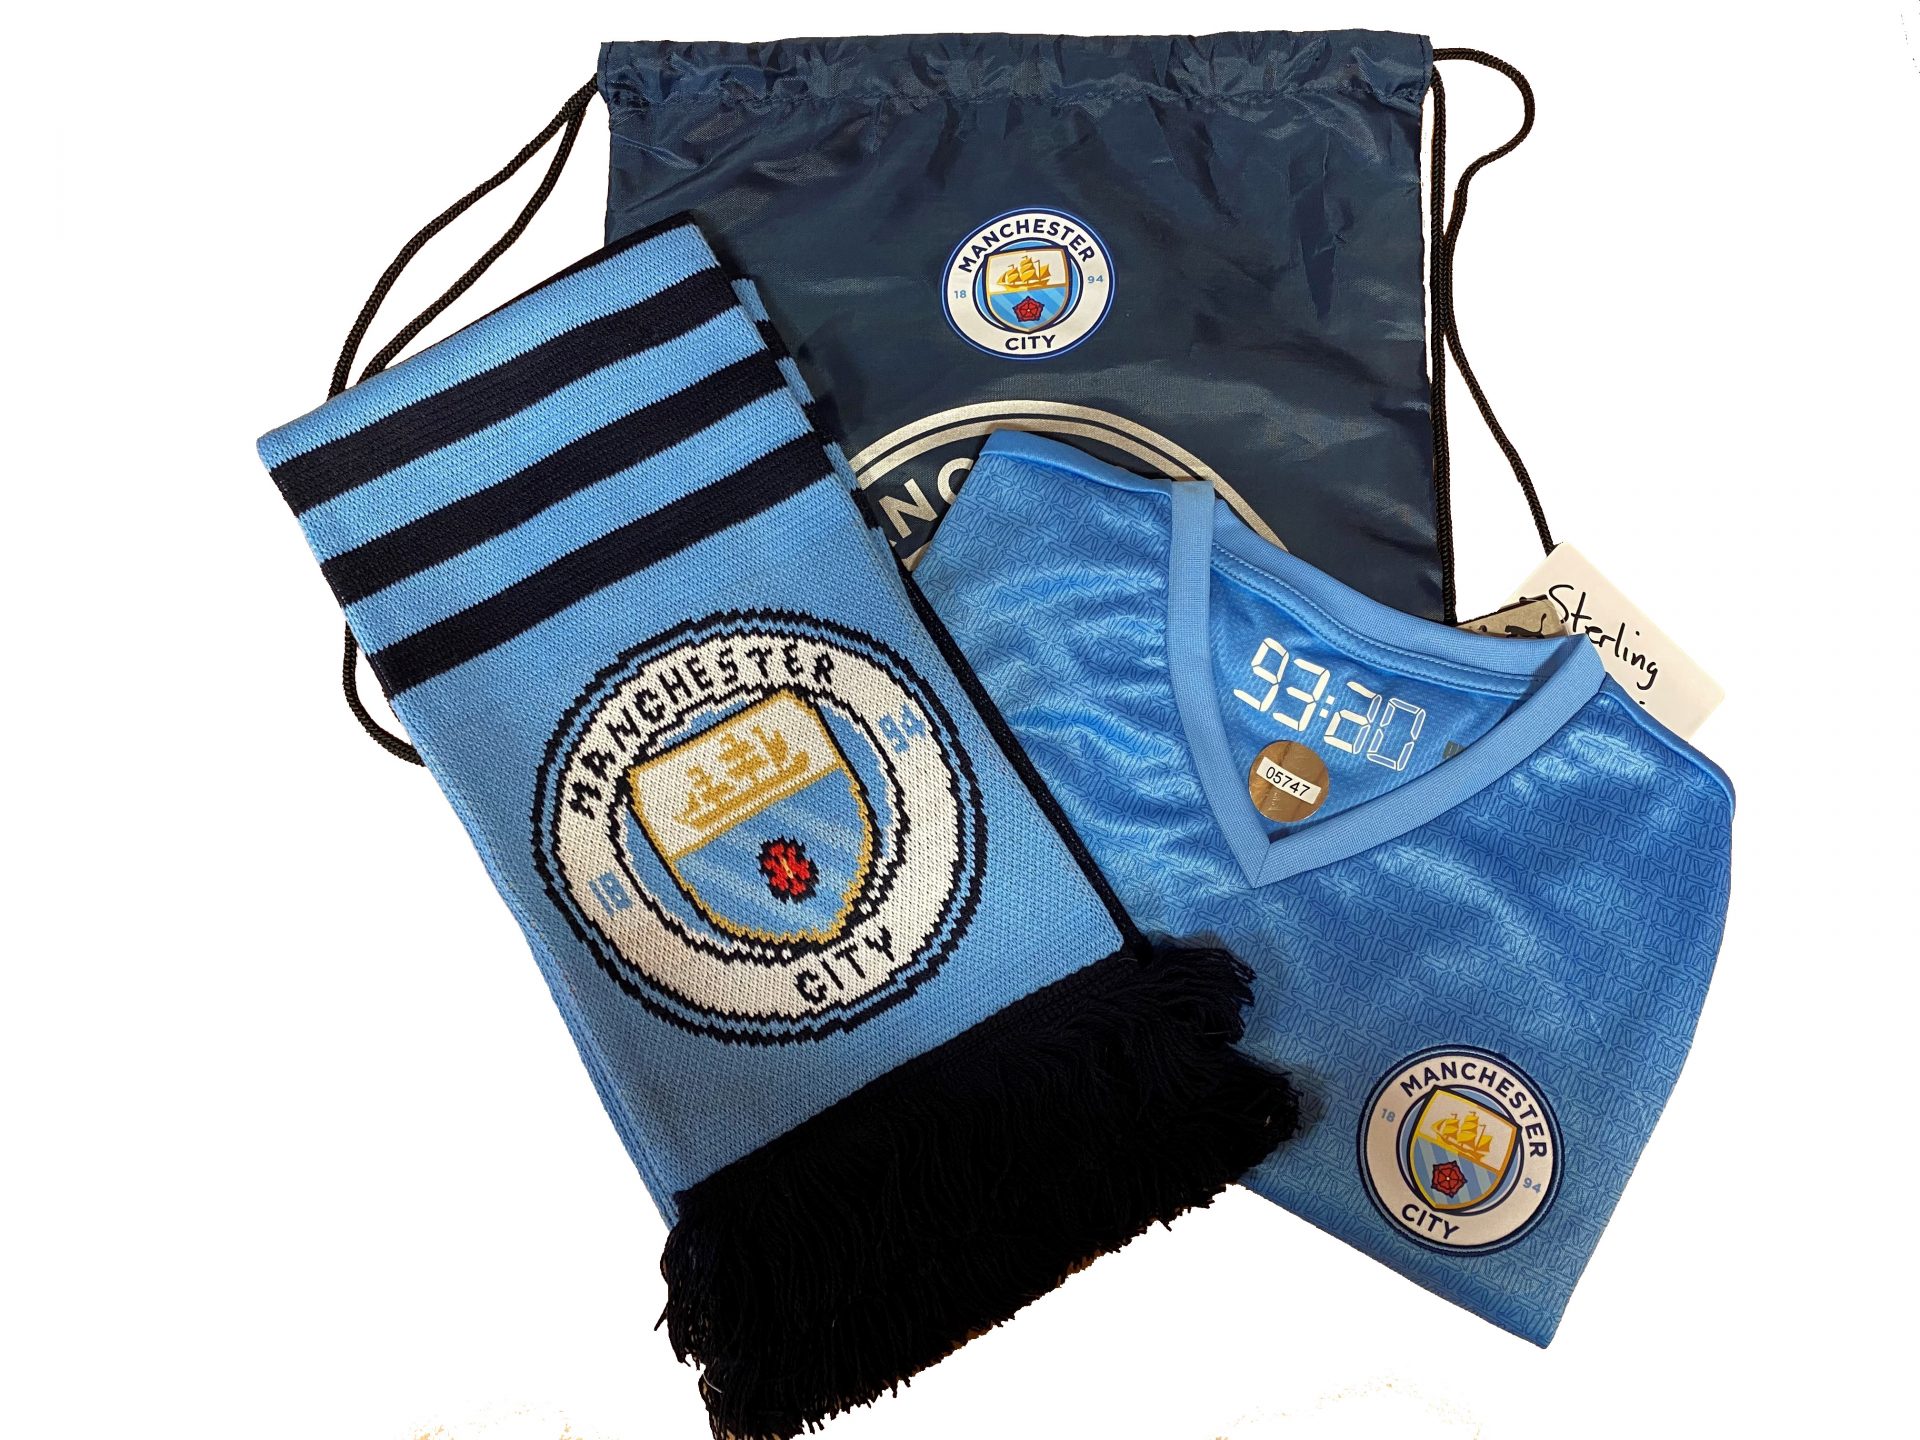 Manchester City scarf and shirt